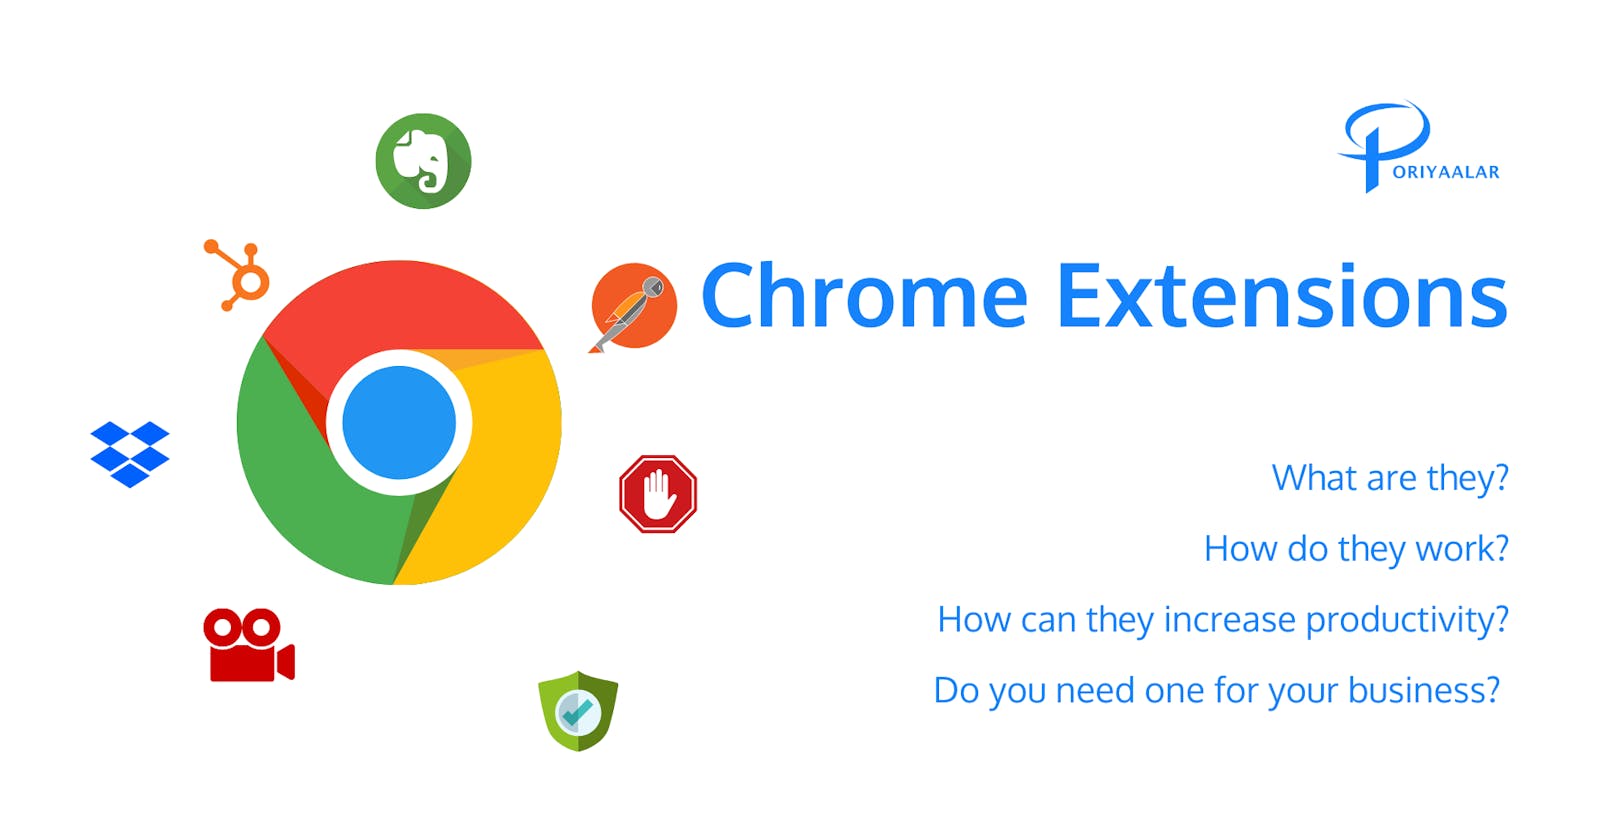 What are chrome extensions?